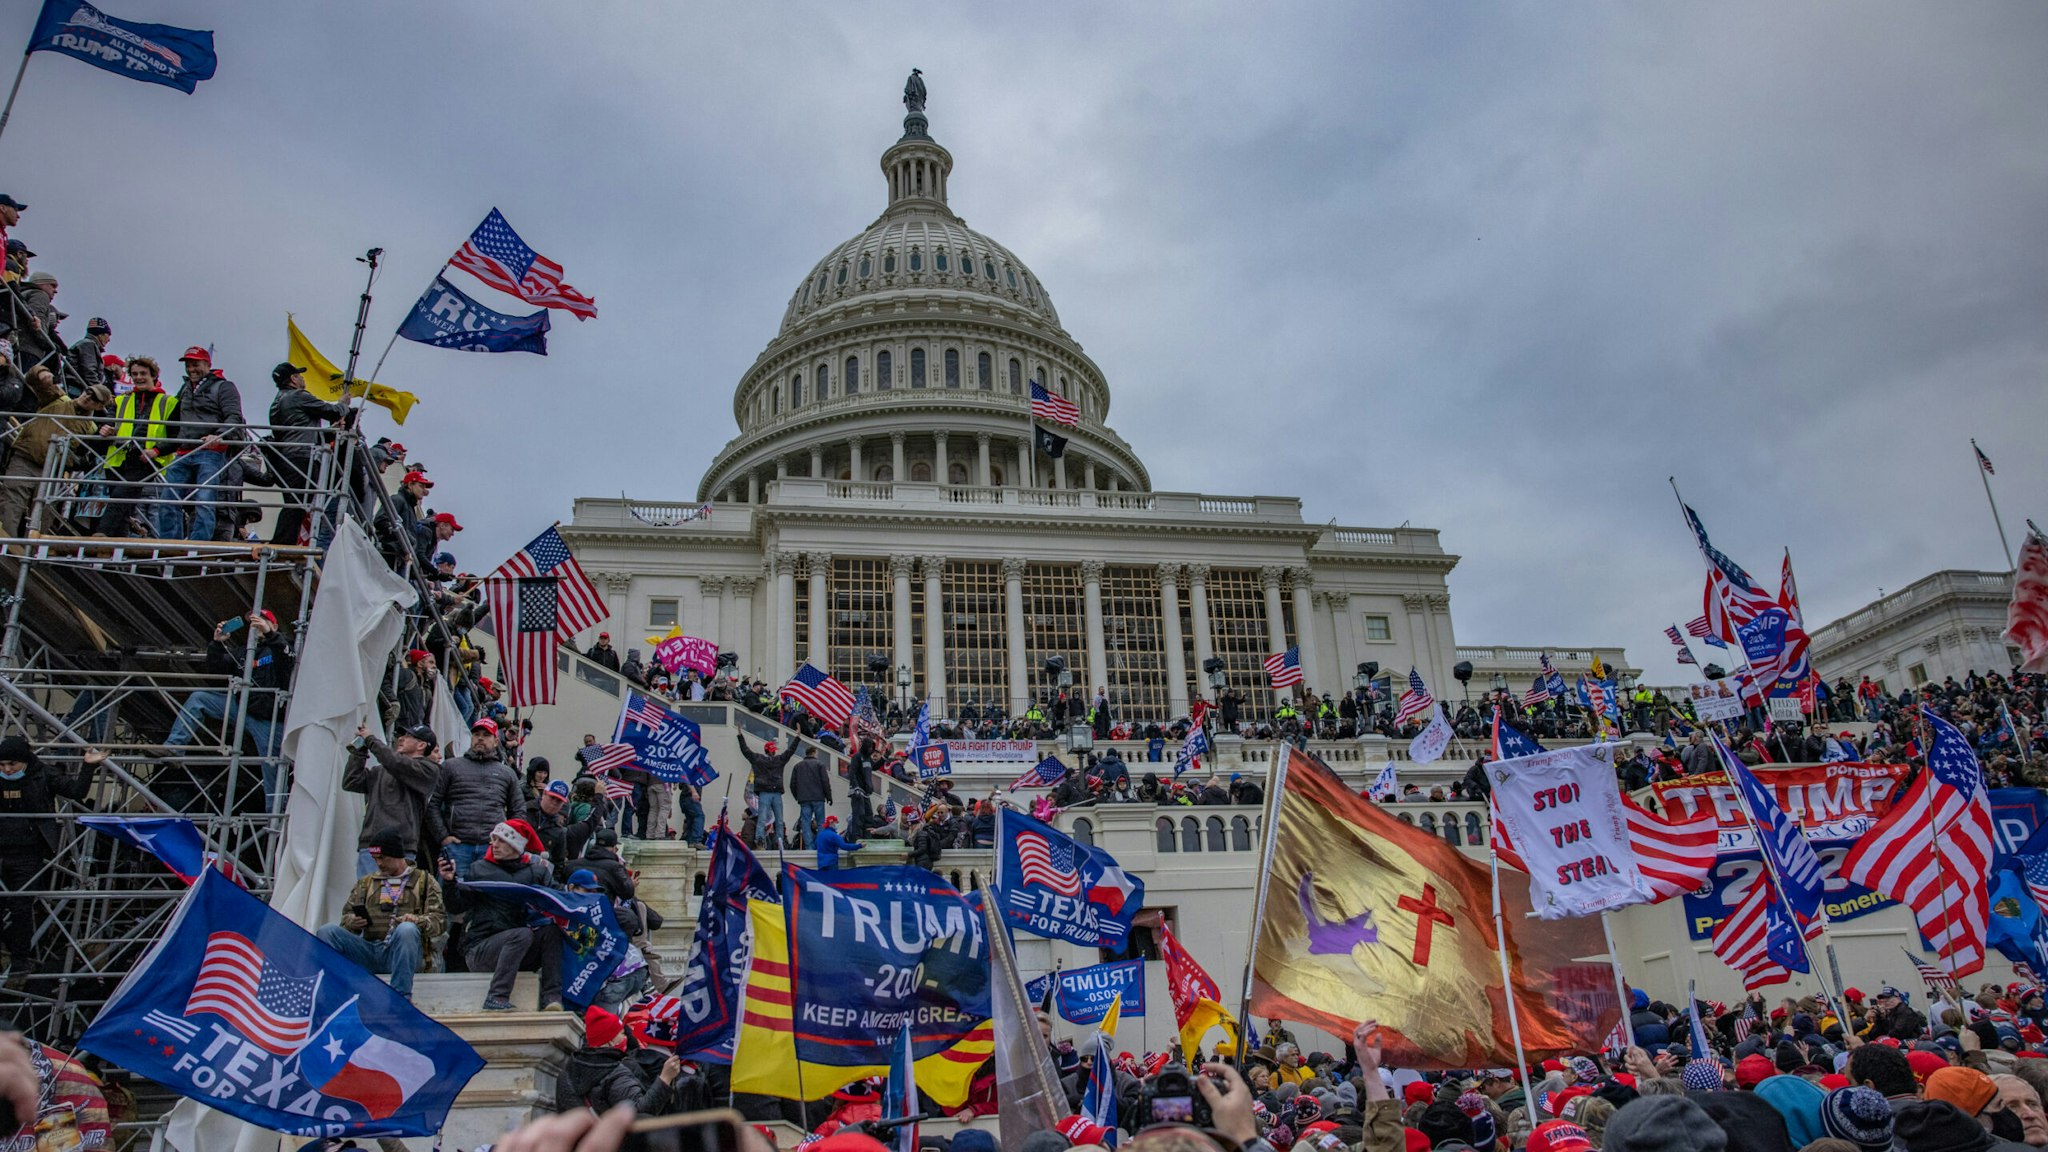 Supporters of President Trump converge on the United States Capitol building. (Photo by Evelyn Hockstein/For The Washington Post via Getty Images)